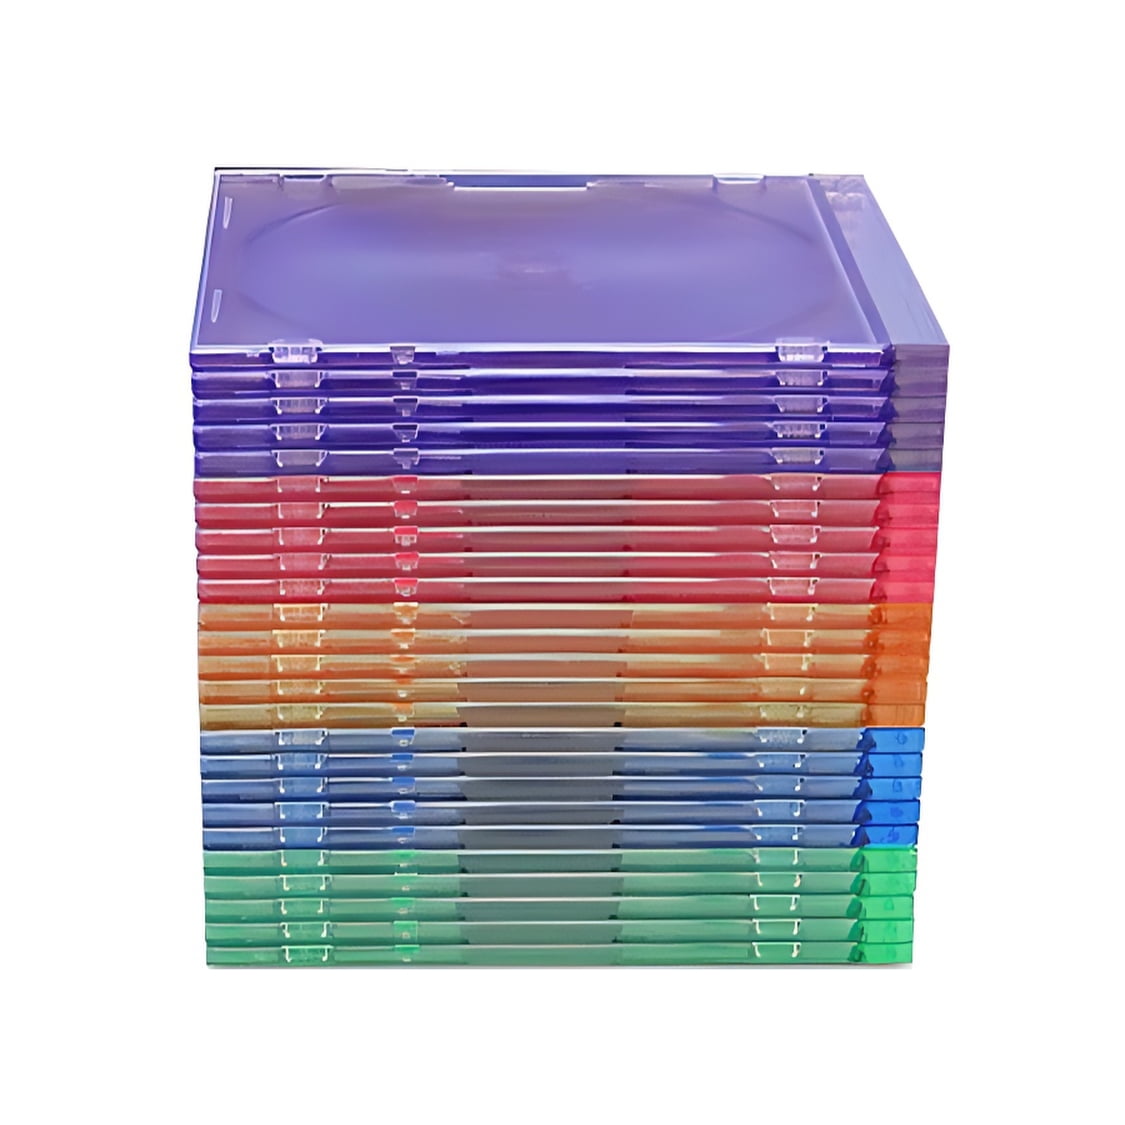 CheckOutStore (25) Standard Single 1-Disc CD Jewel Cases (Assorted Color)